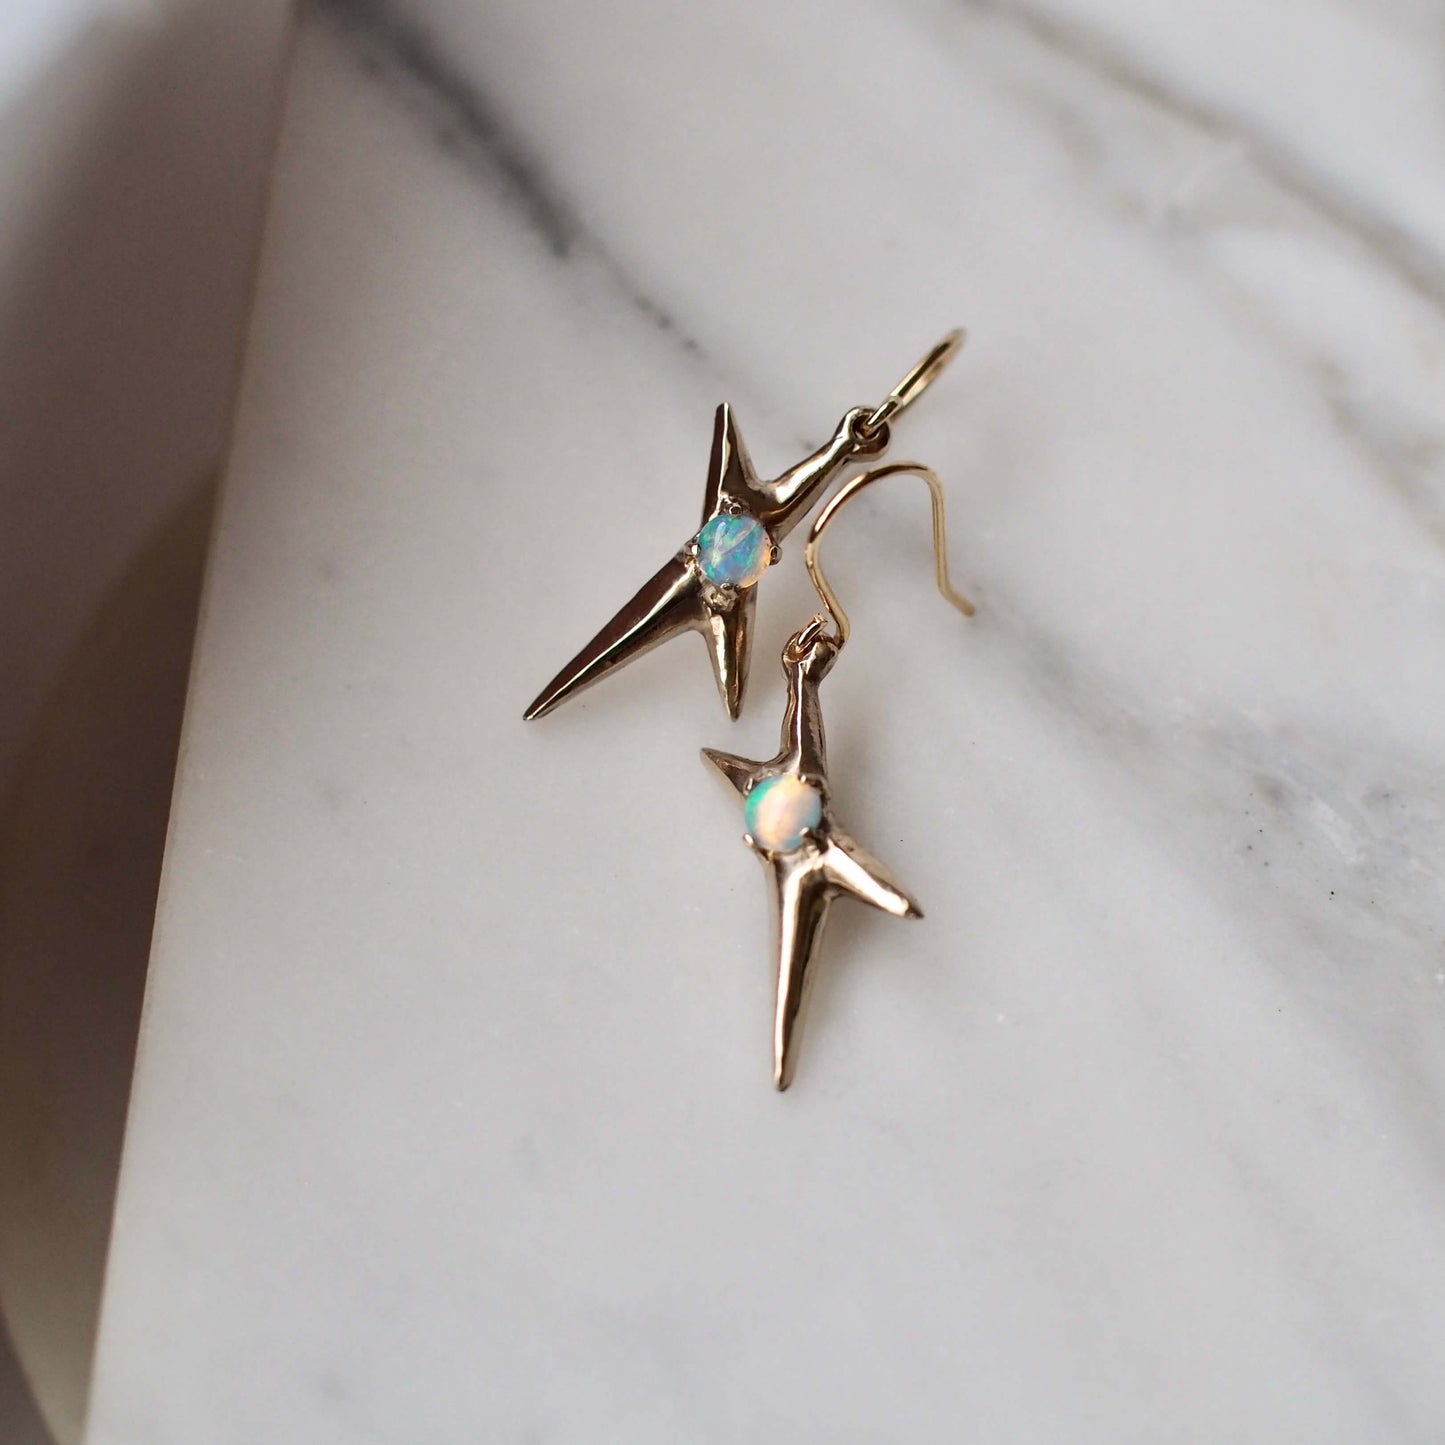 Spikey electric spark earrings set with sustainably sourced opal in gold tone